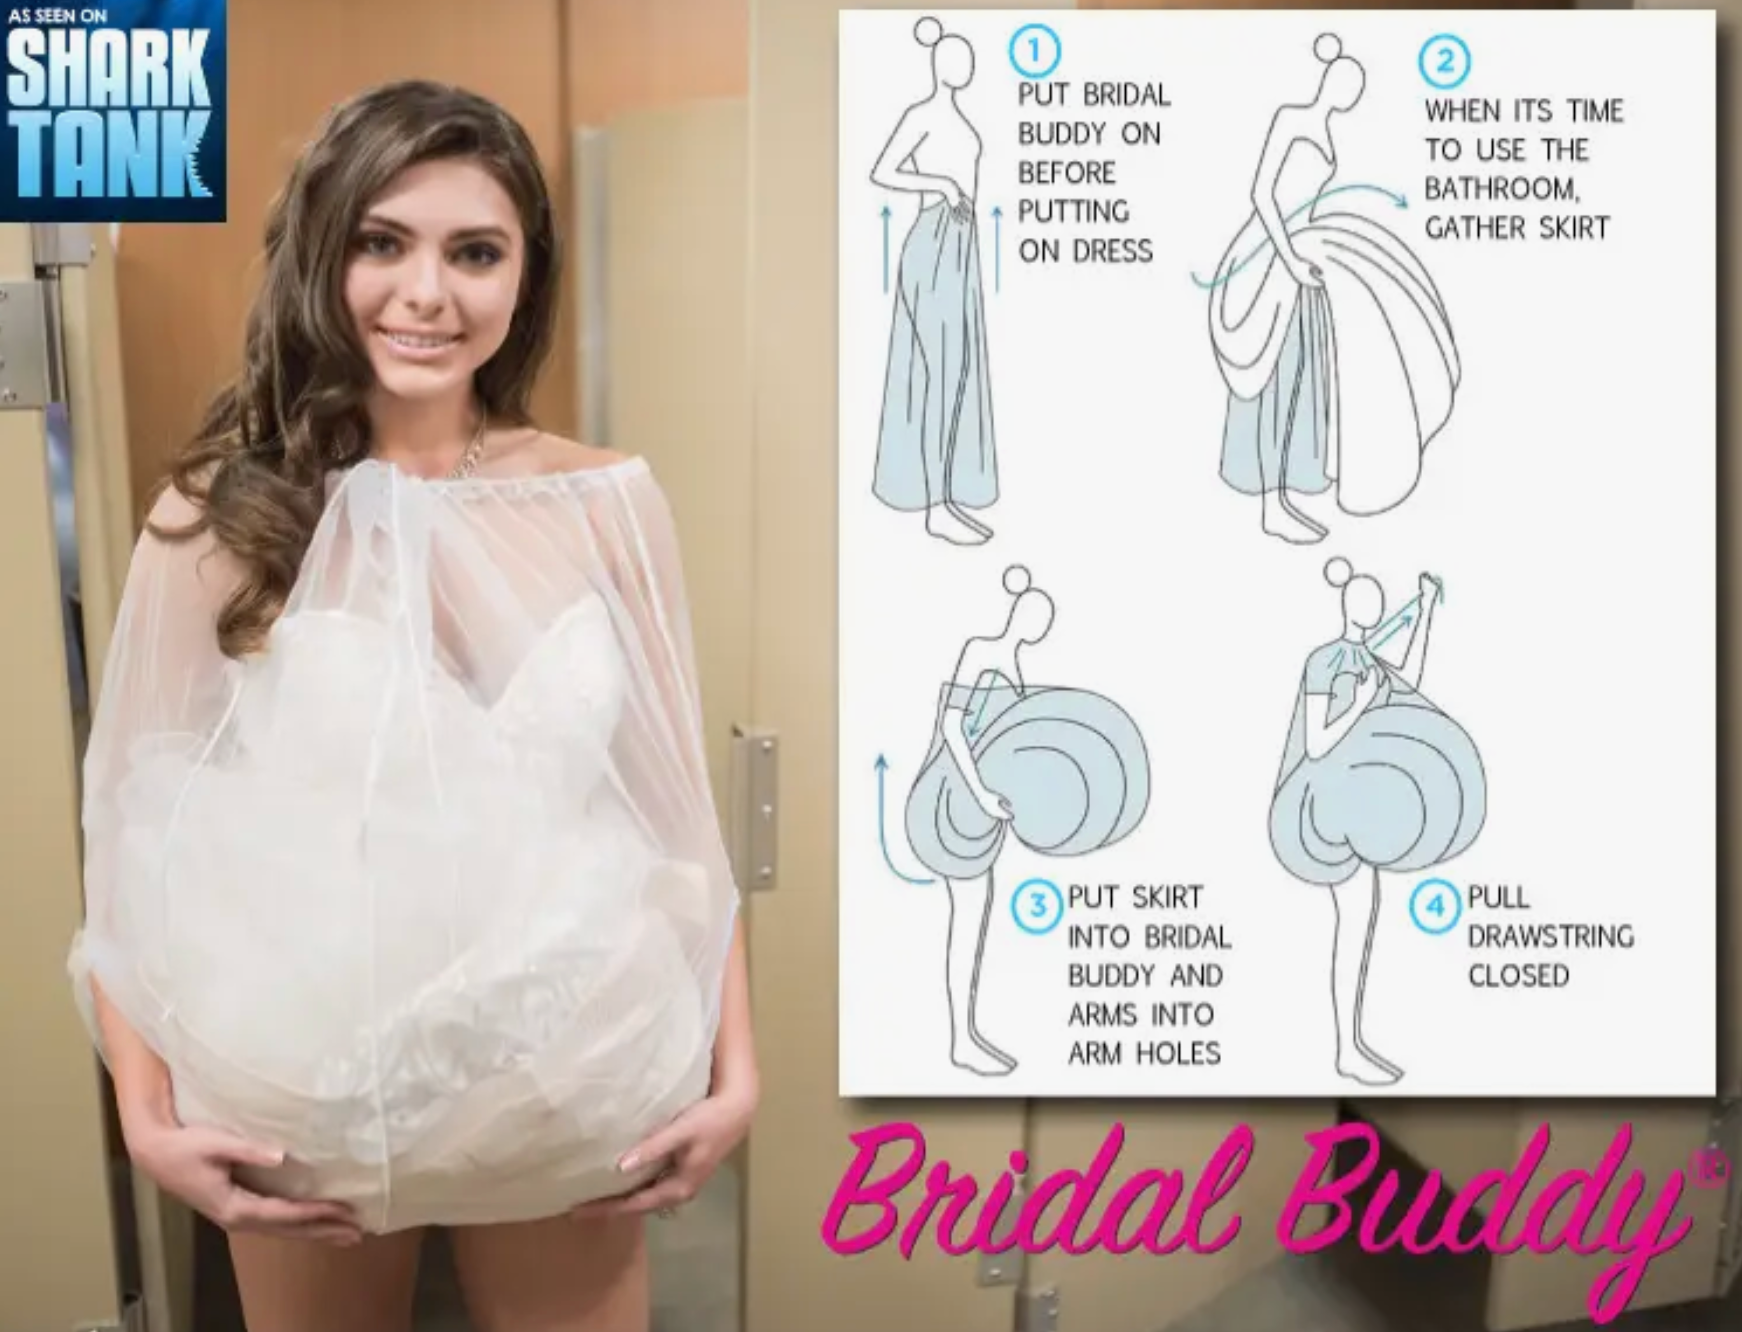 Bridal Buddy wholesale products